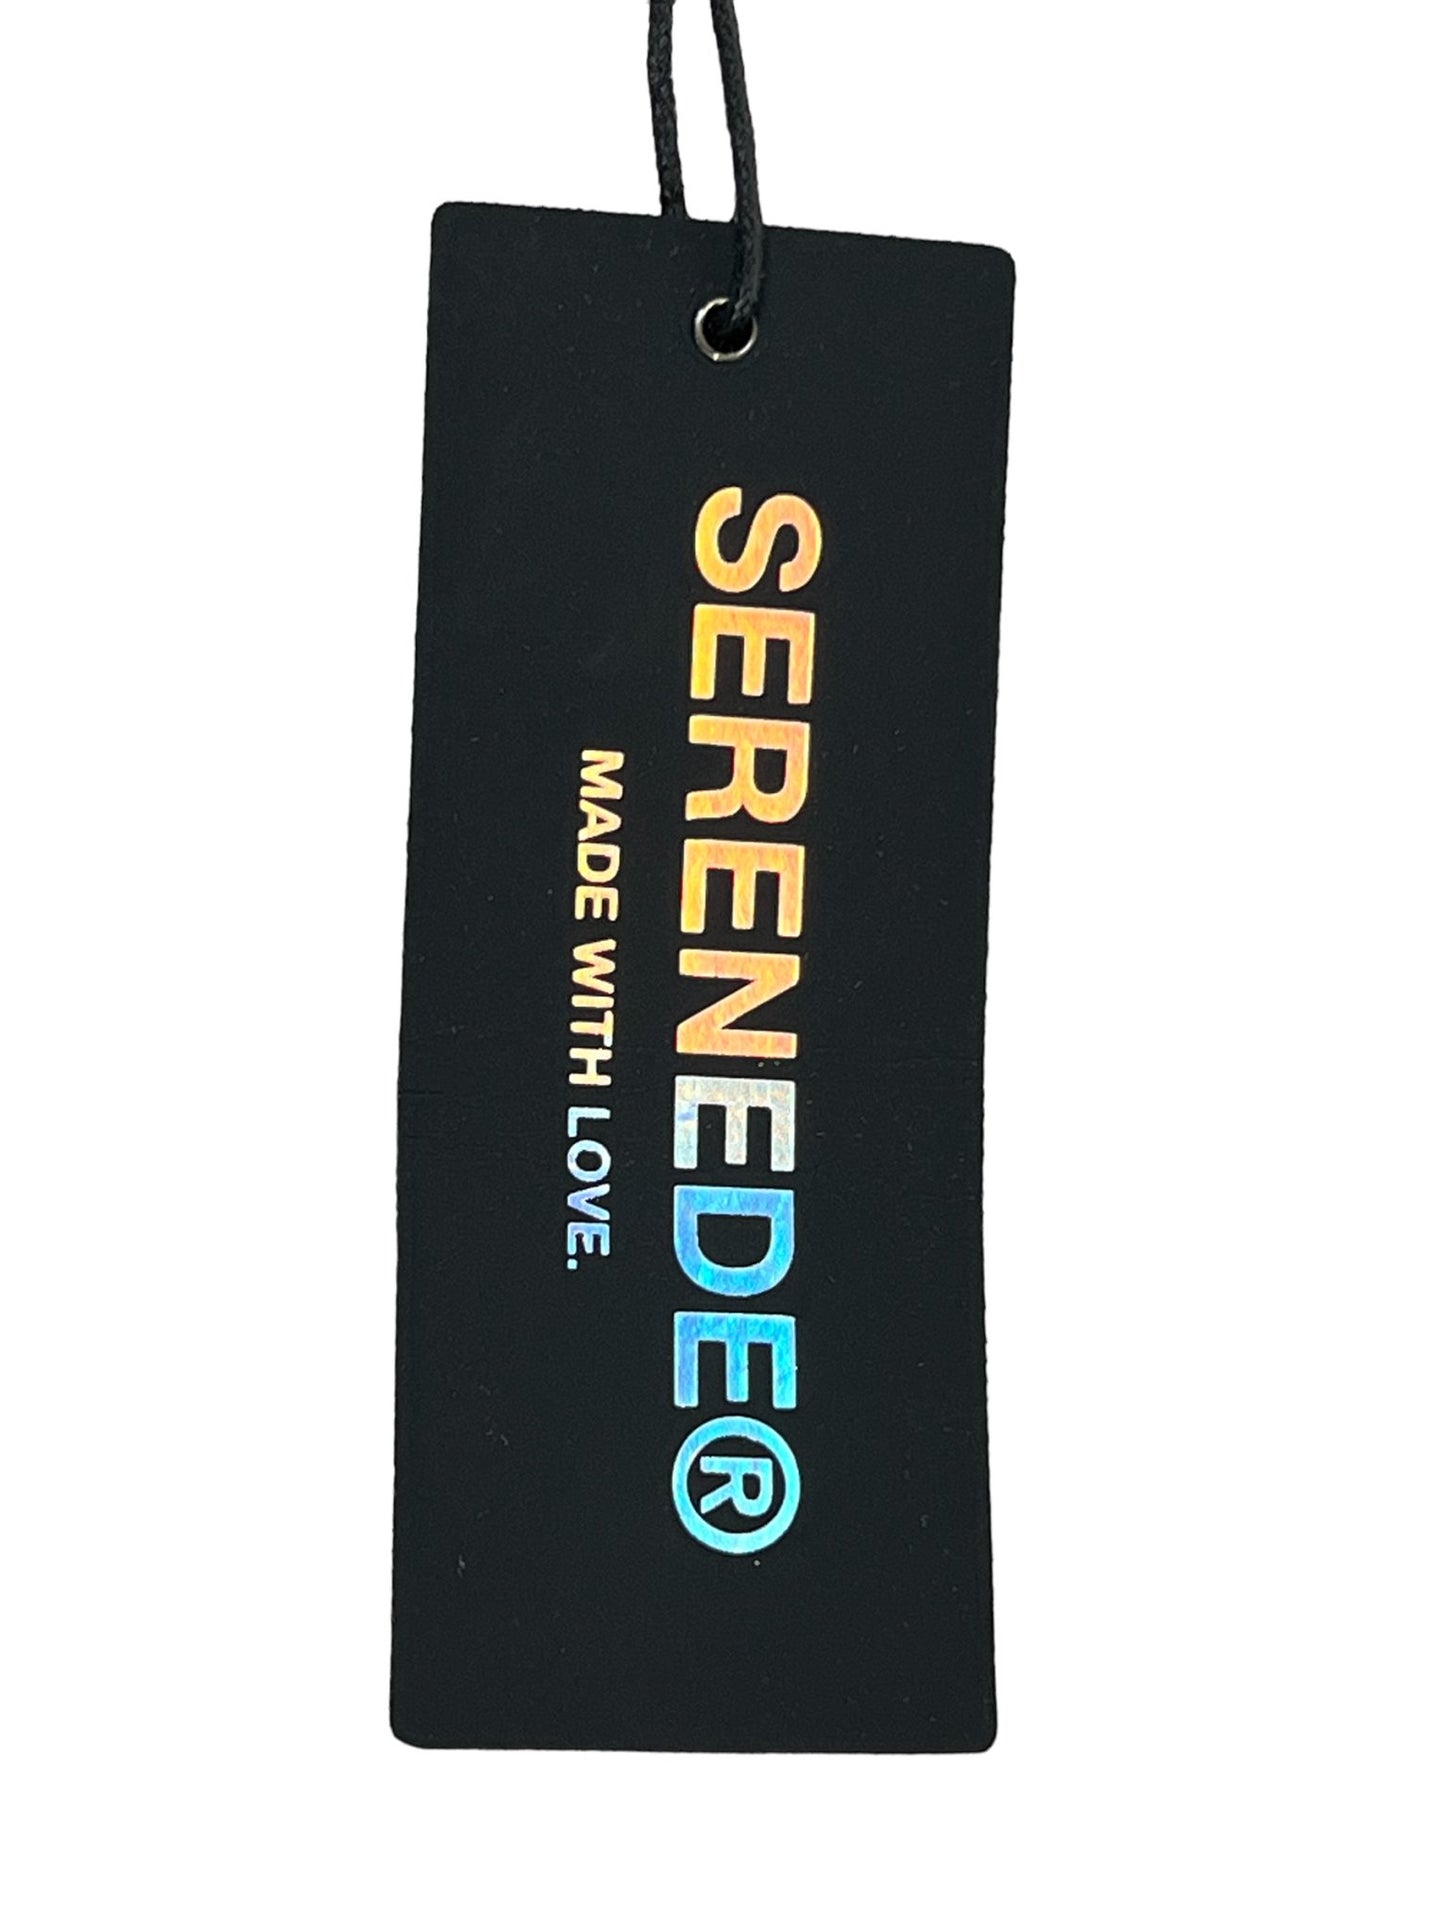 Black clothing tag with the brand "SERENEDE" and the slogan "made with love" in white and yellow text.